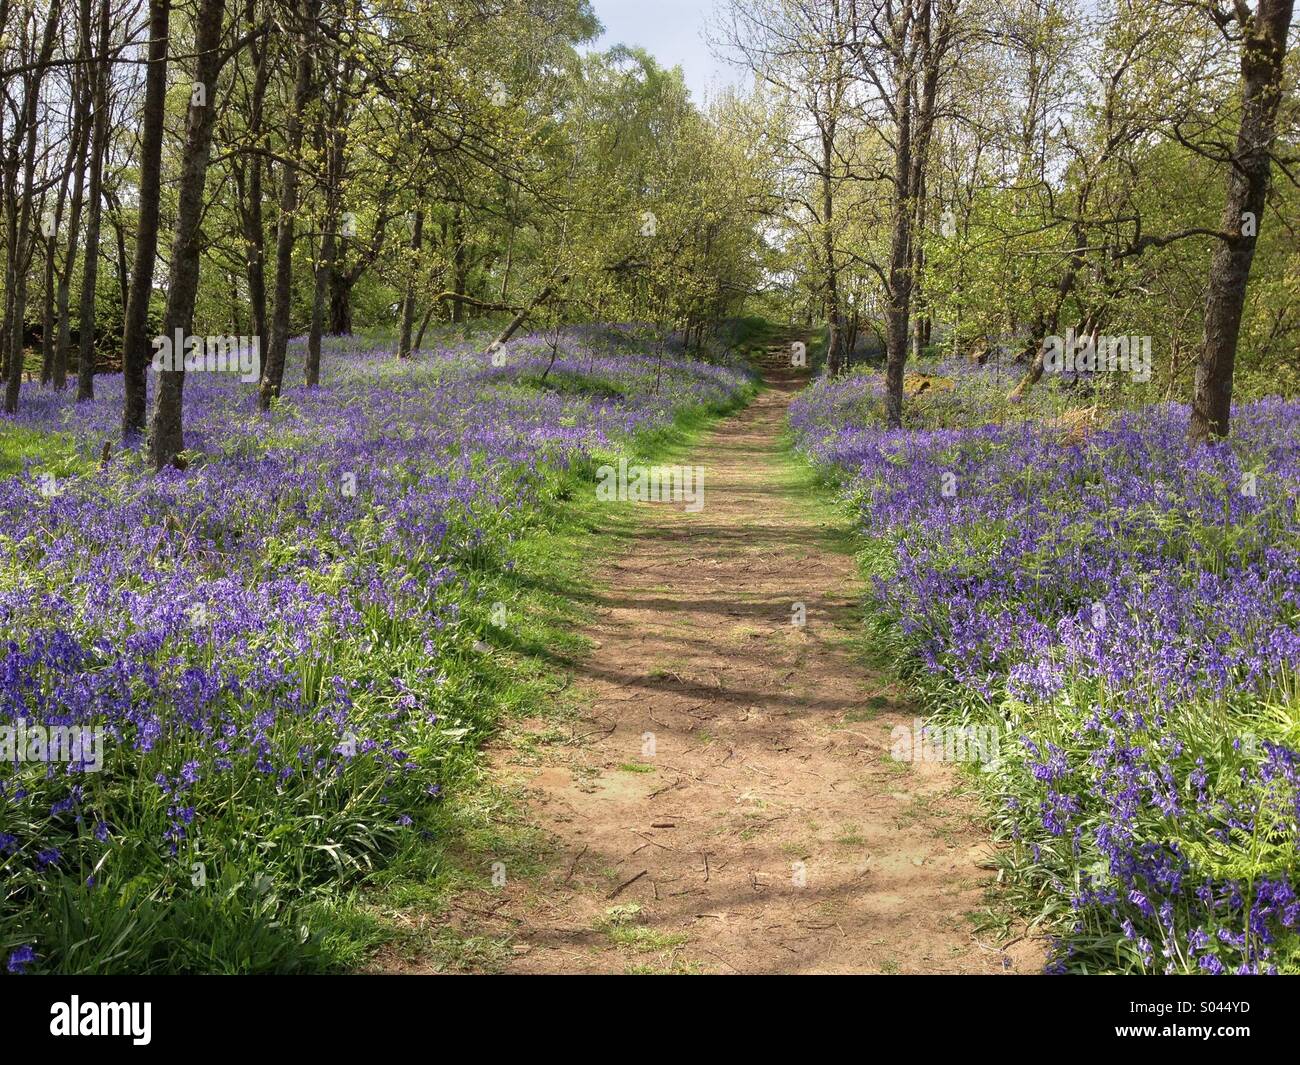 The Pennine Way, as the path approaches Low Force from Middleton-in-Teesdale passes through a carpet of bluebells in Spring. An area of Outstanding Natural Beauty - AONB. Co Durham, England Stock Photo